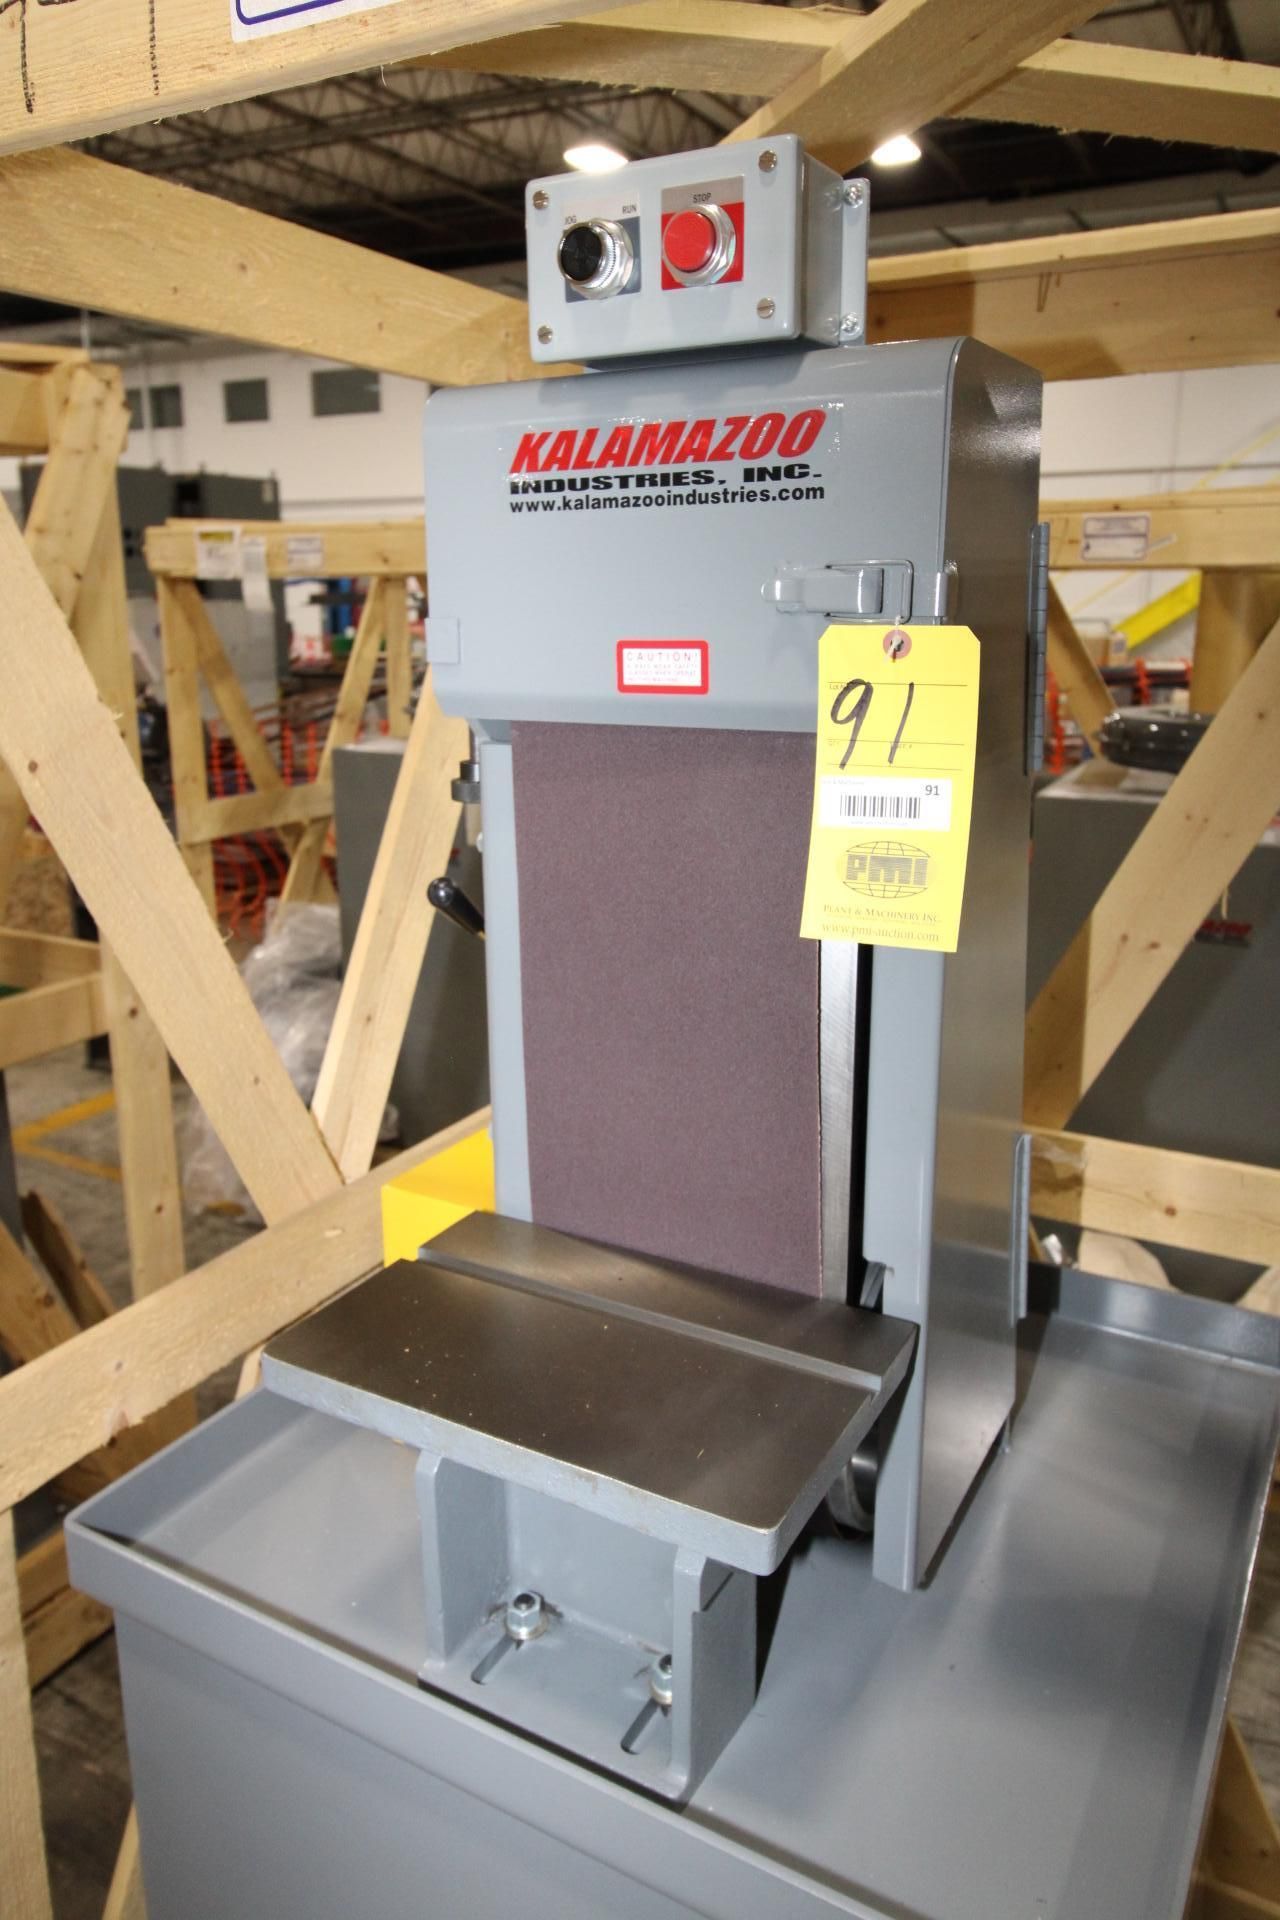 INDUSTRIAL SANDER W/ DUST COLLECTOR, KALAMAZOO S8D, 8” x 60”, 7.5 HP, w/ dust collection system, - Image 5 of 8